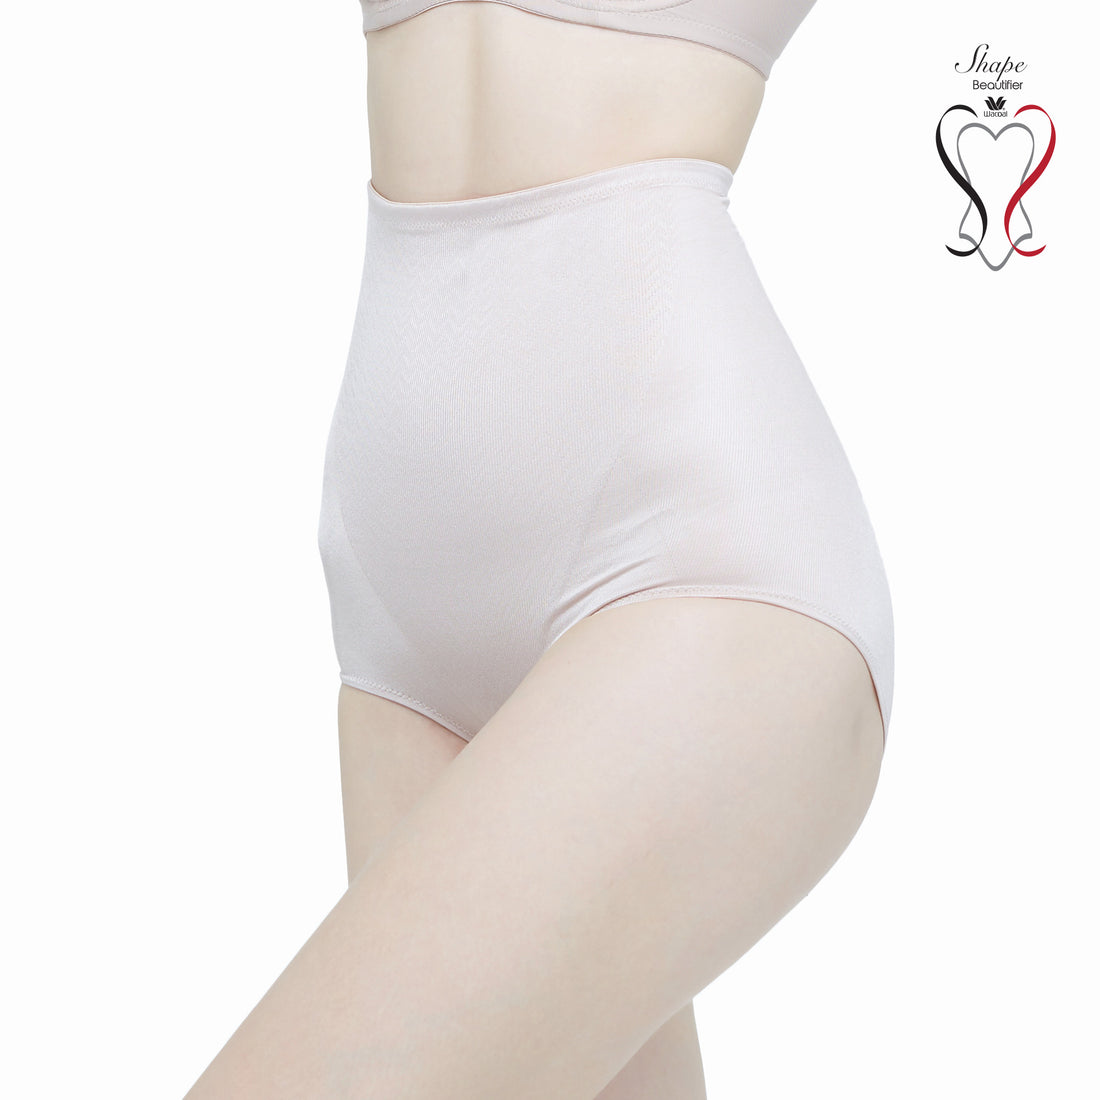 Wacoal Shape Beautifier Stay Slimming pants for the abdomen and hips, model WG5040, beige (BE)